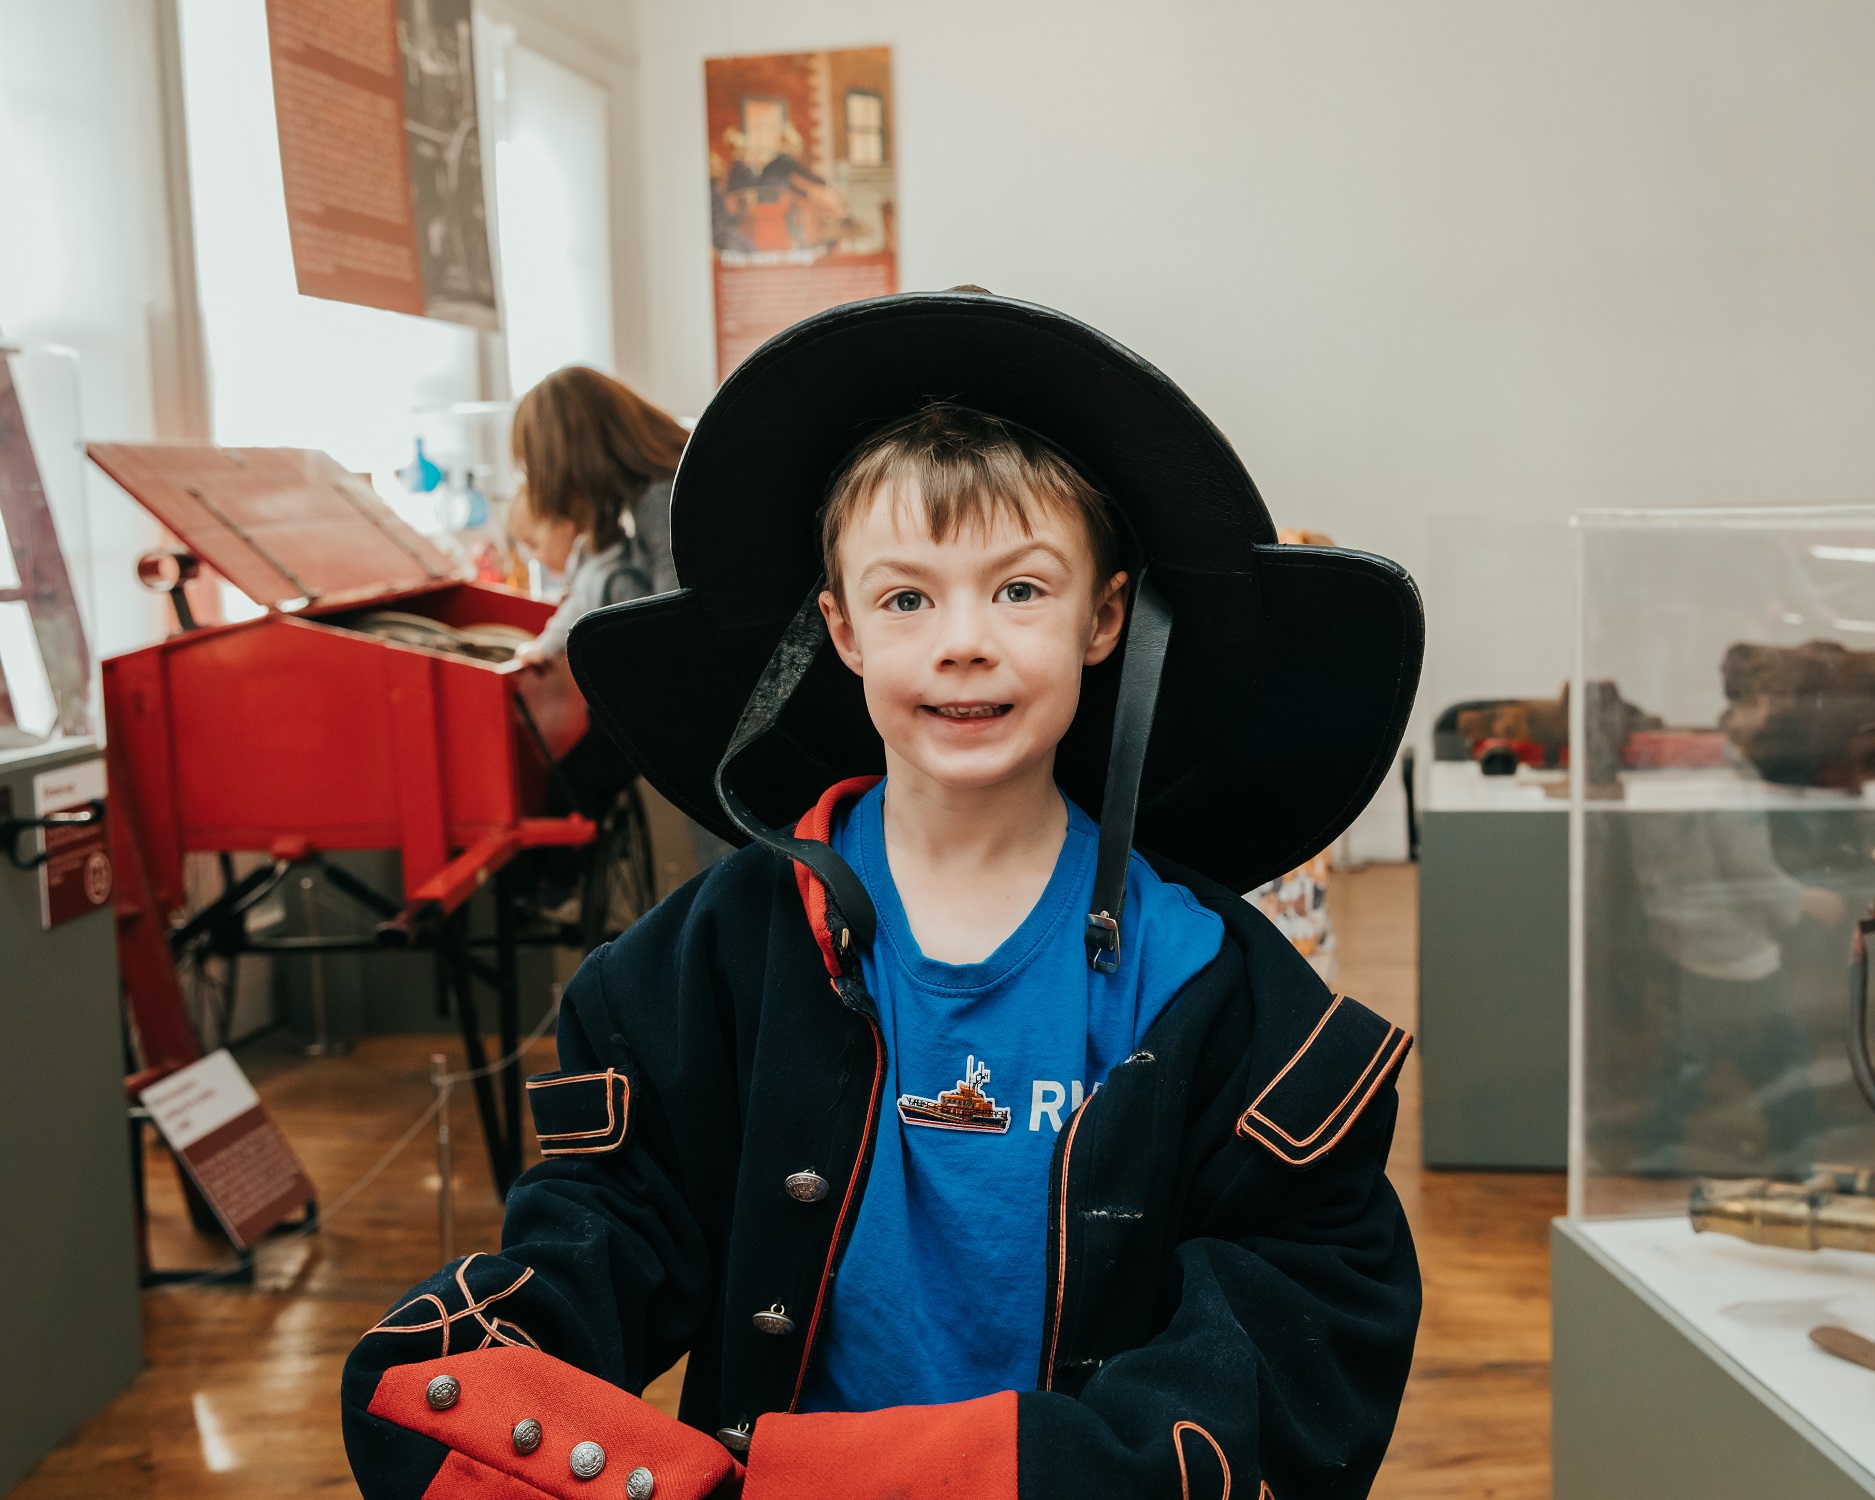 A young boy dressed up in historic fire fighter's uniform in a gallery in the National Emergency Services Museum.